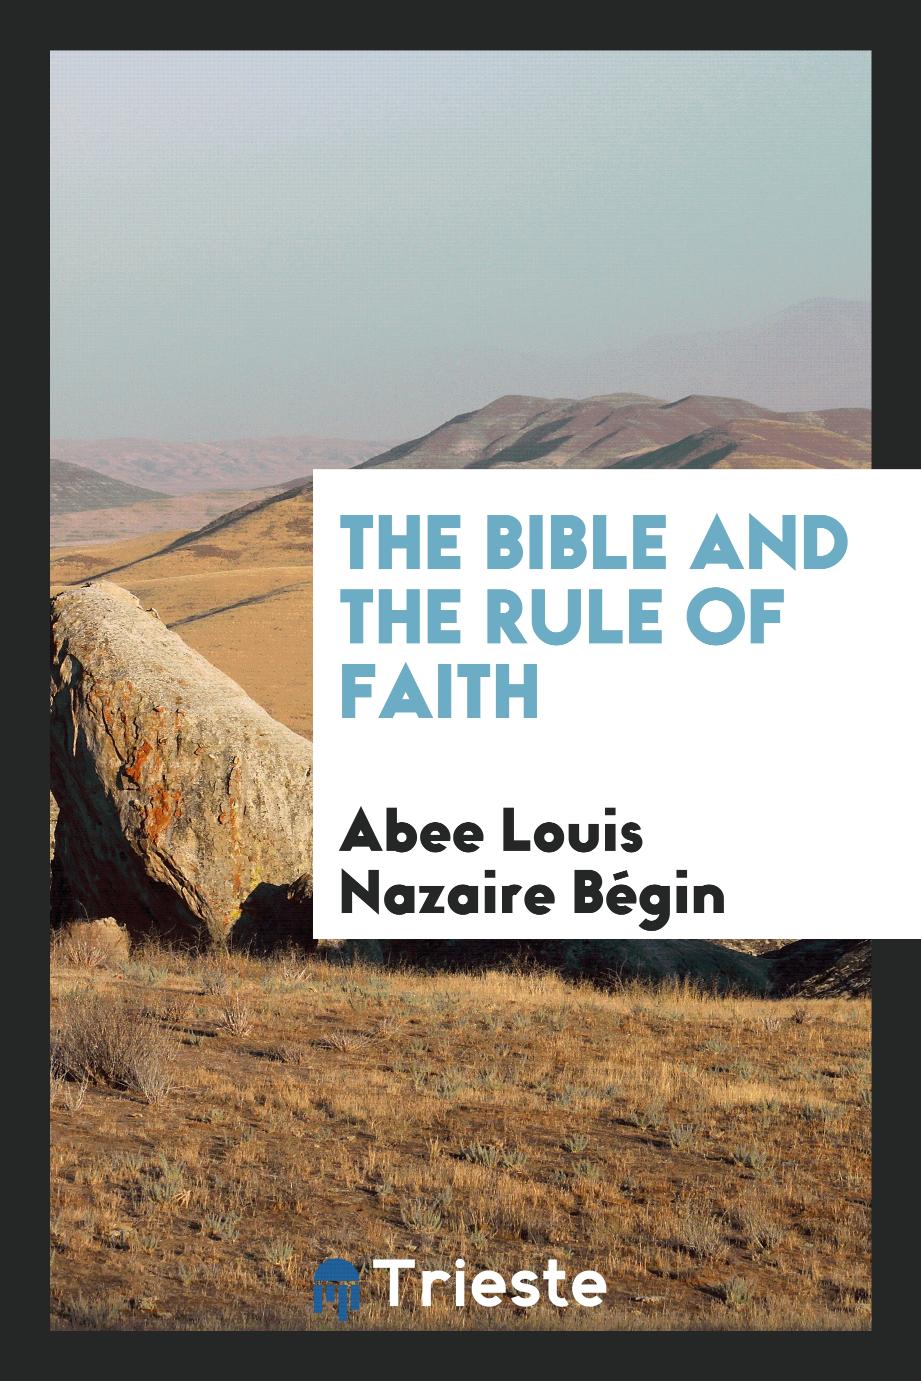 The Bible and the rule of faith